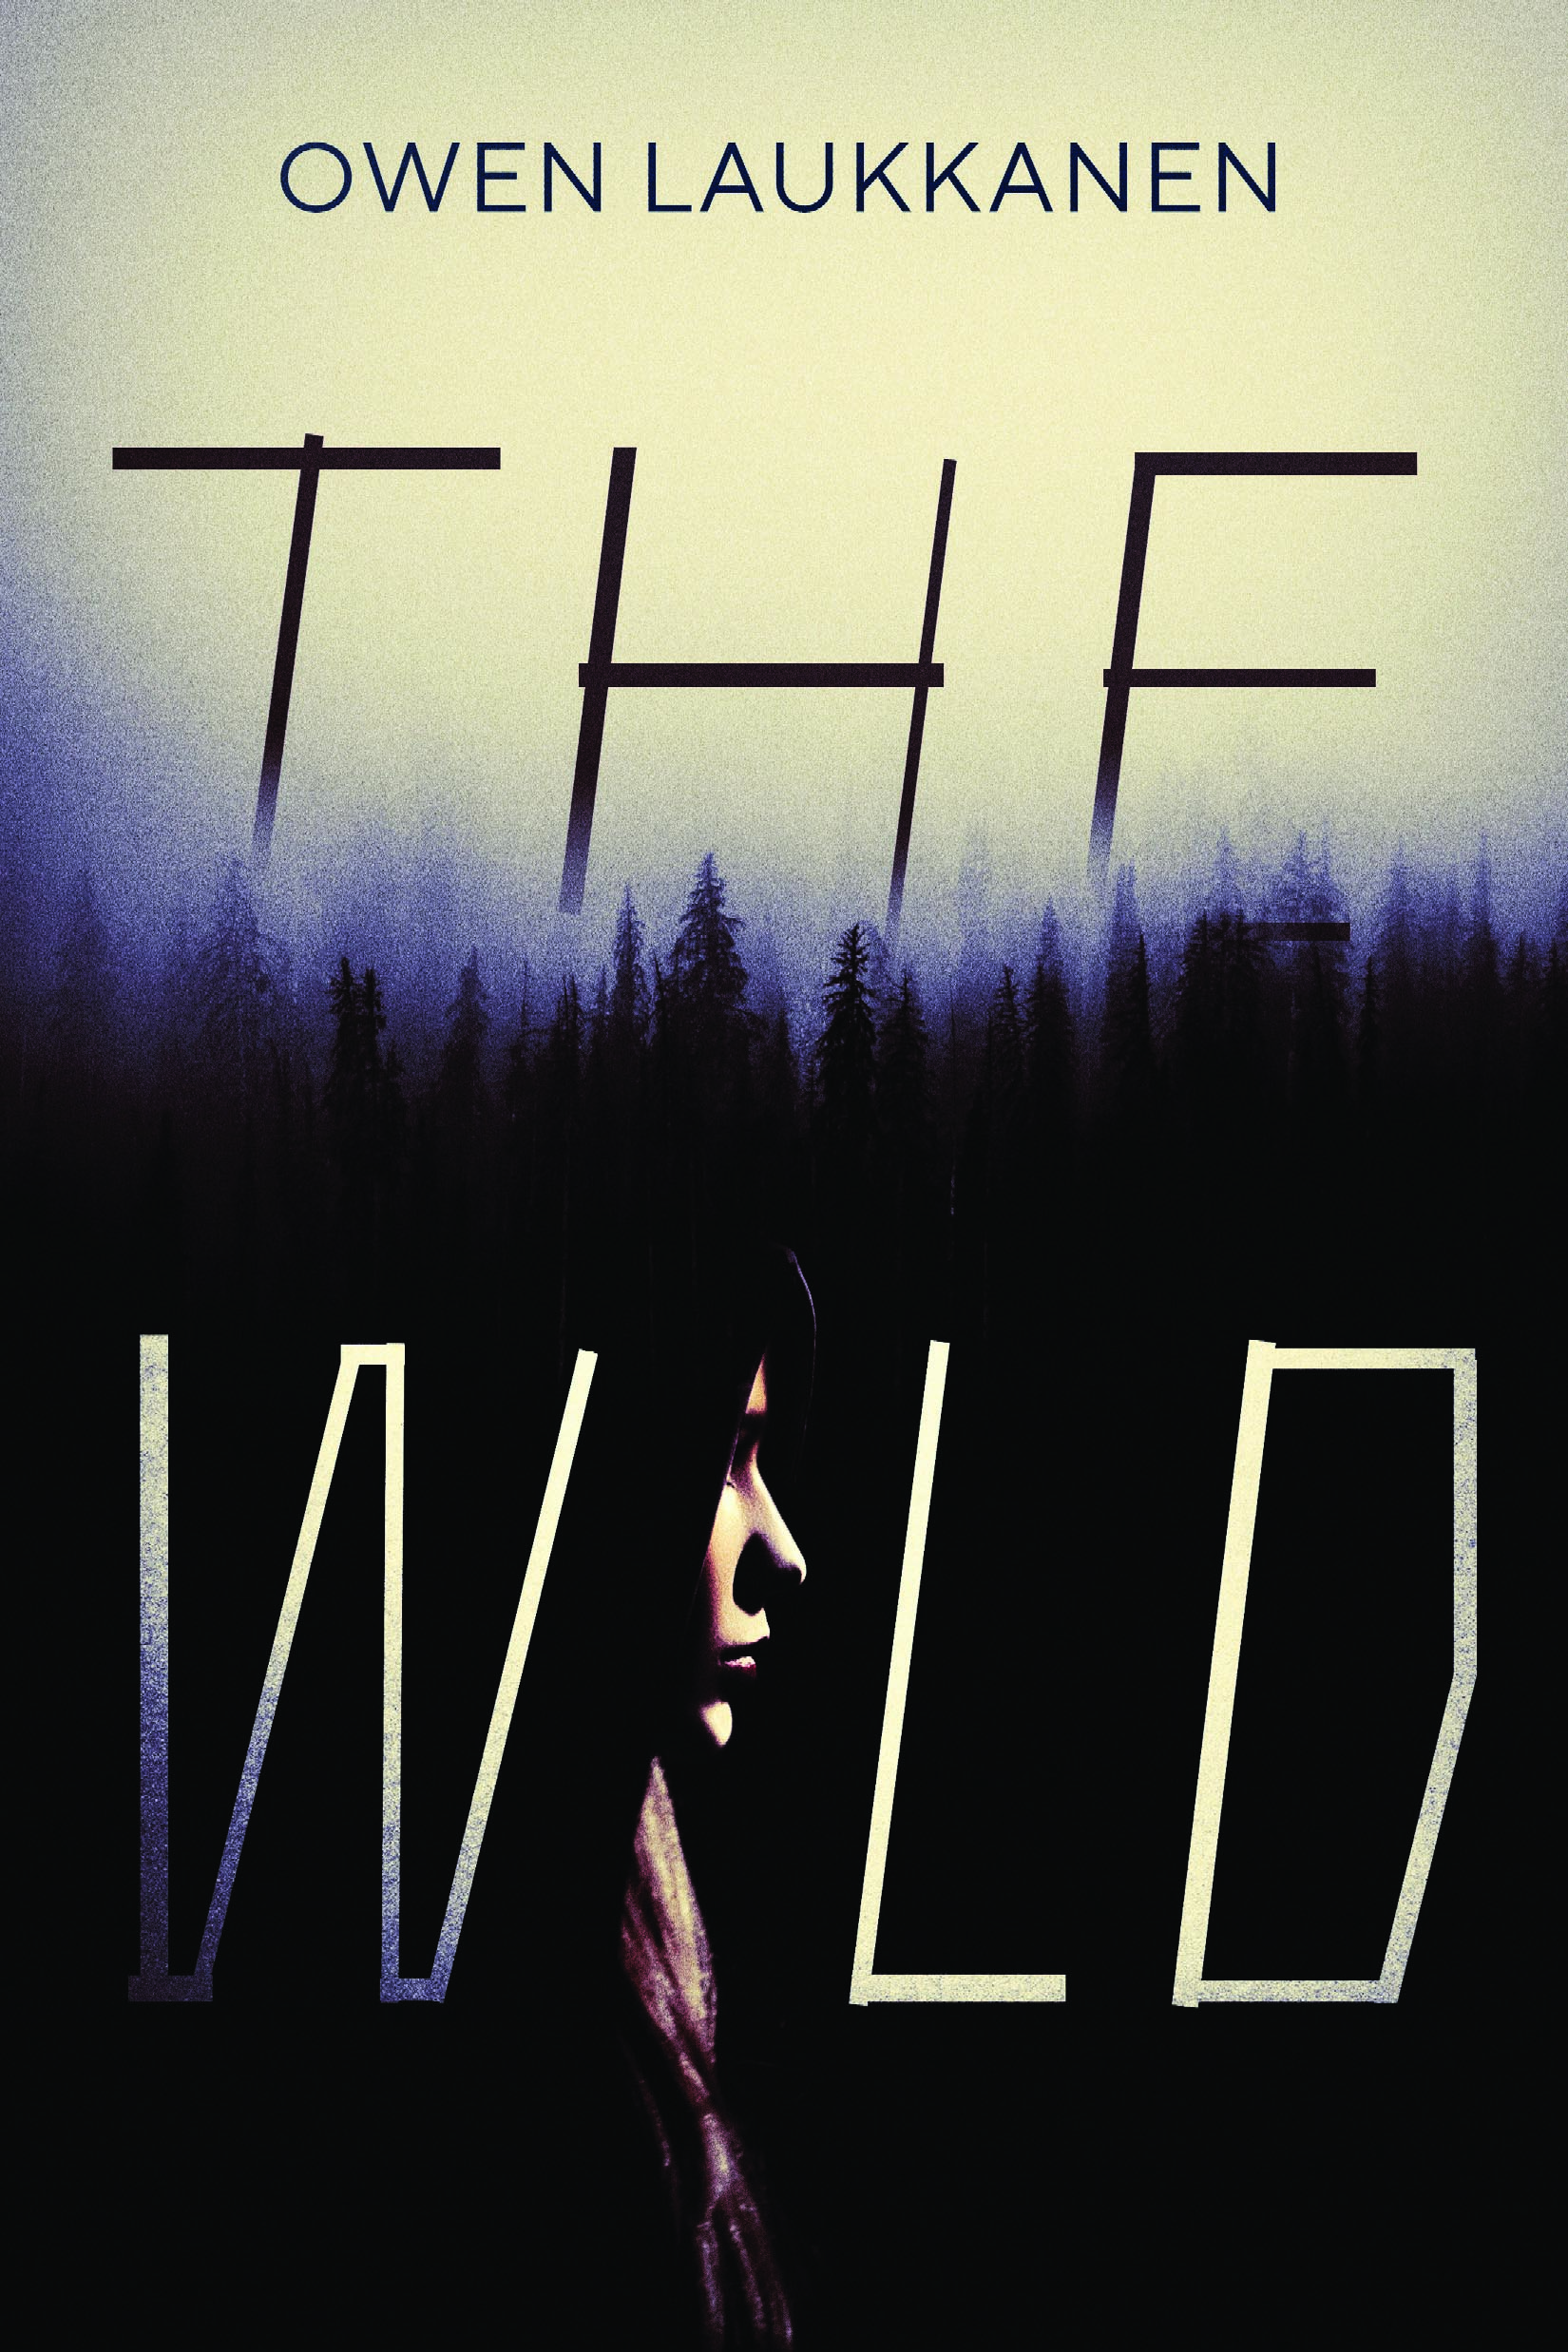 Cover of The Wild with the tops of a forest